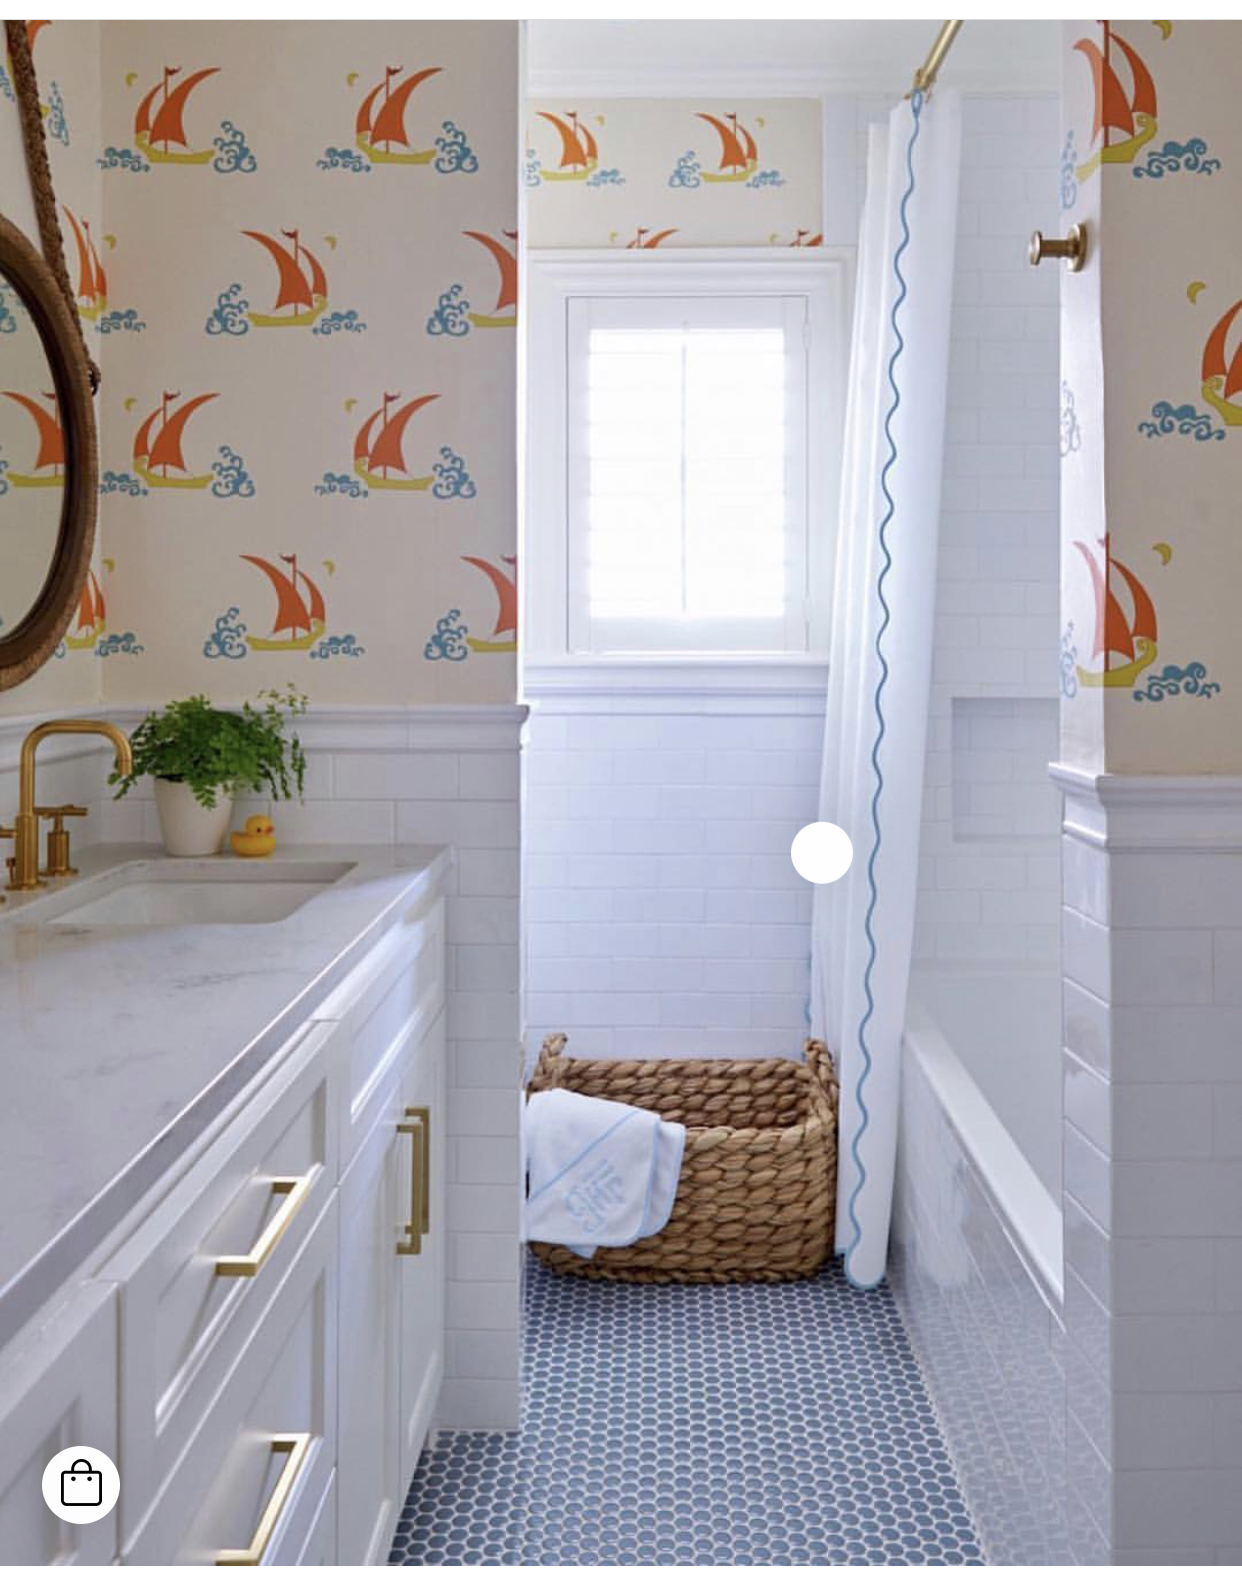  *Kids bath inspiration: Love the penny tile and brass accents. And that fun wallpaper!